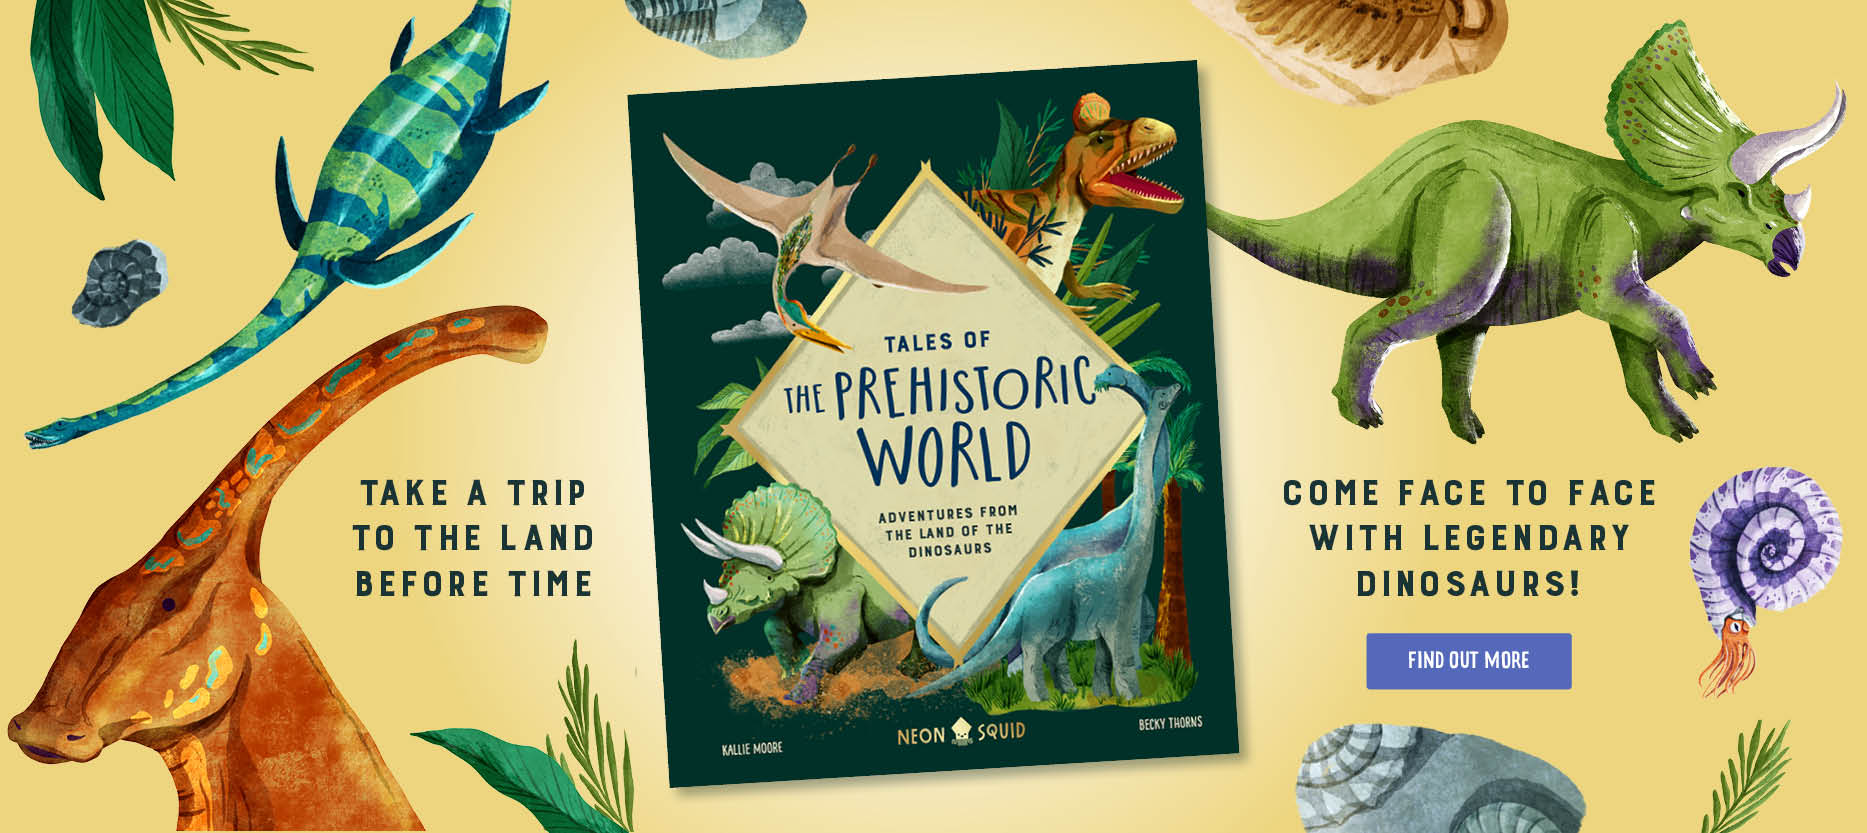 Tales-of-prehistoric-world-homepage-banner